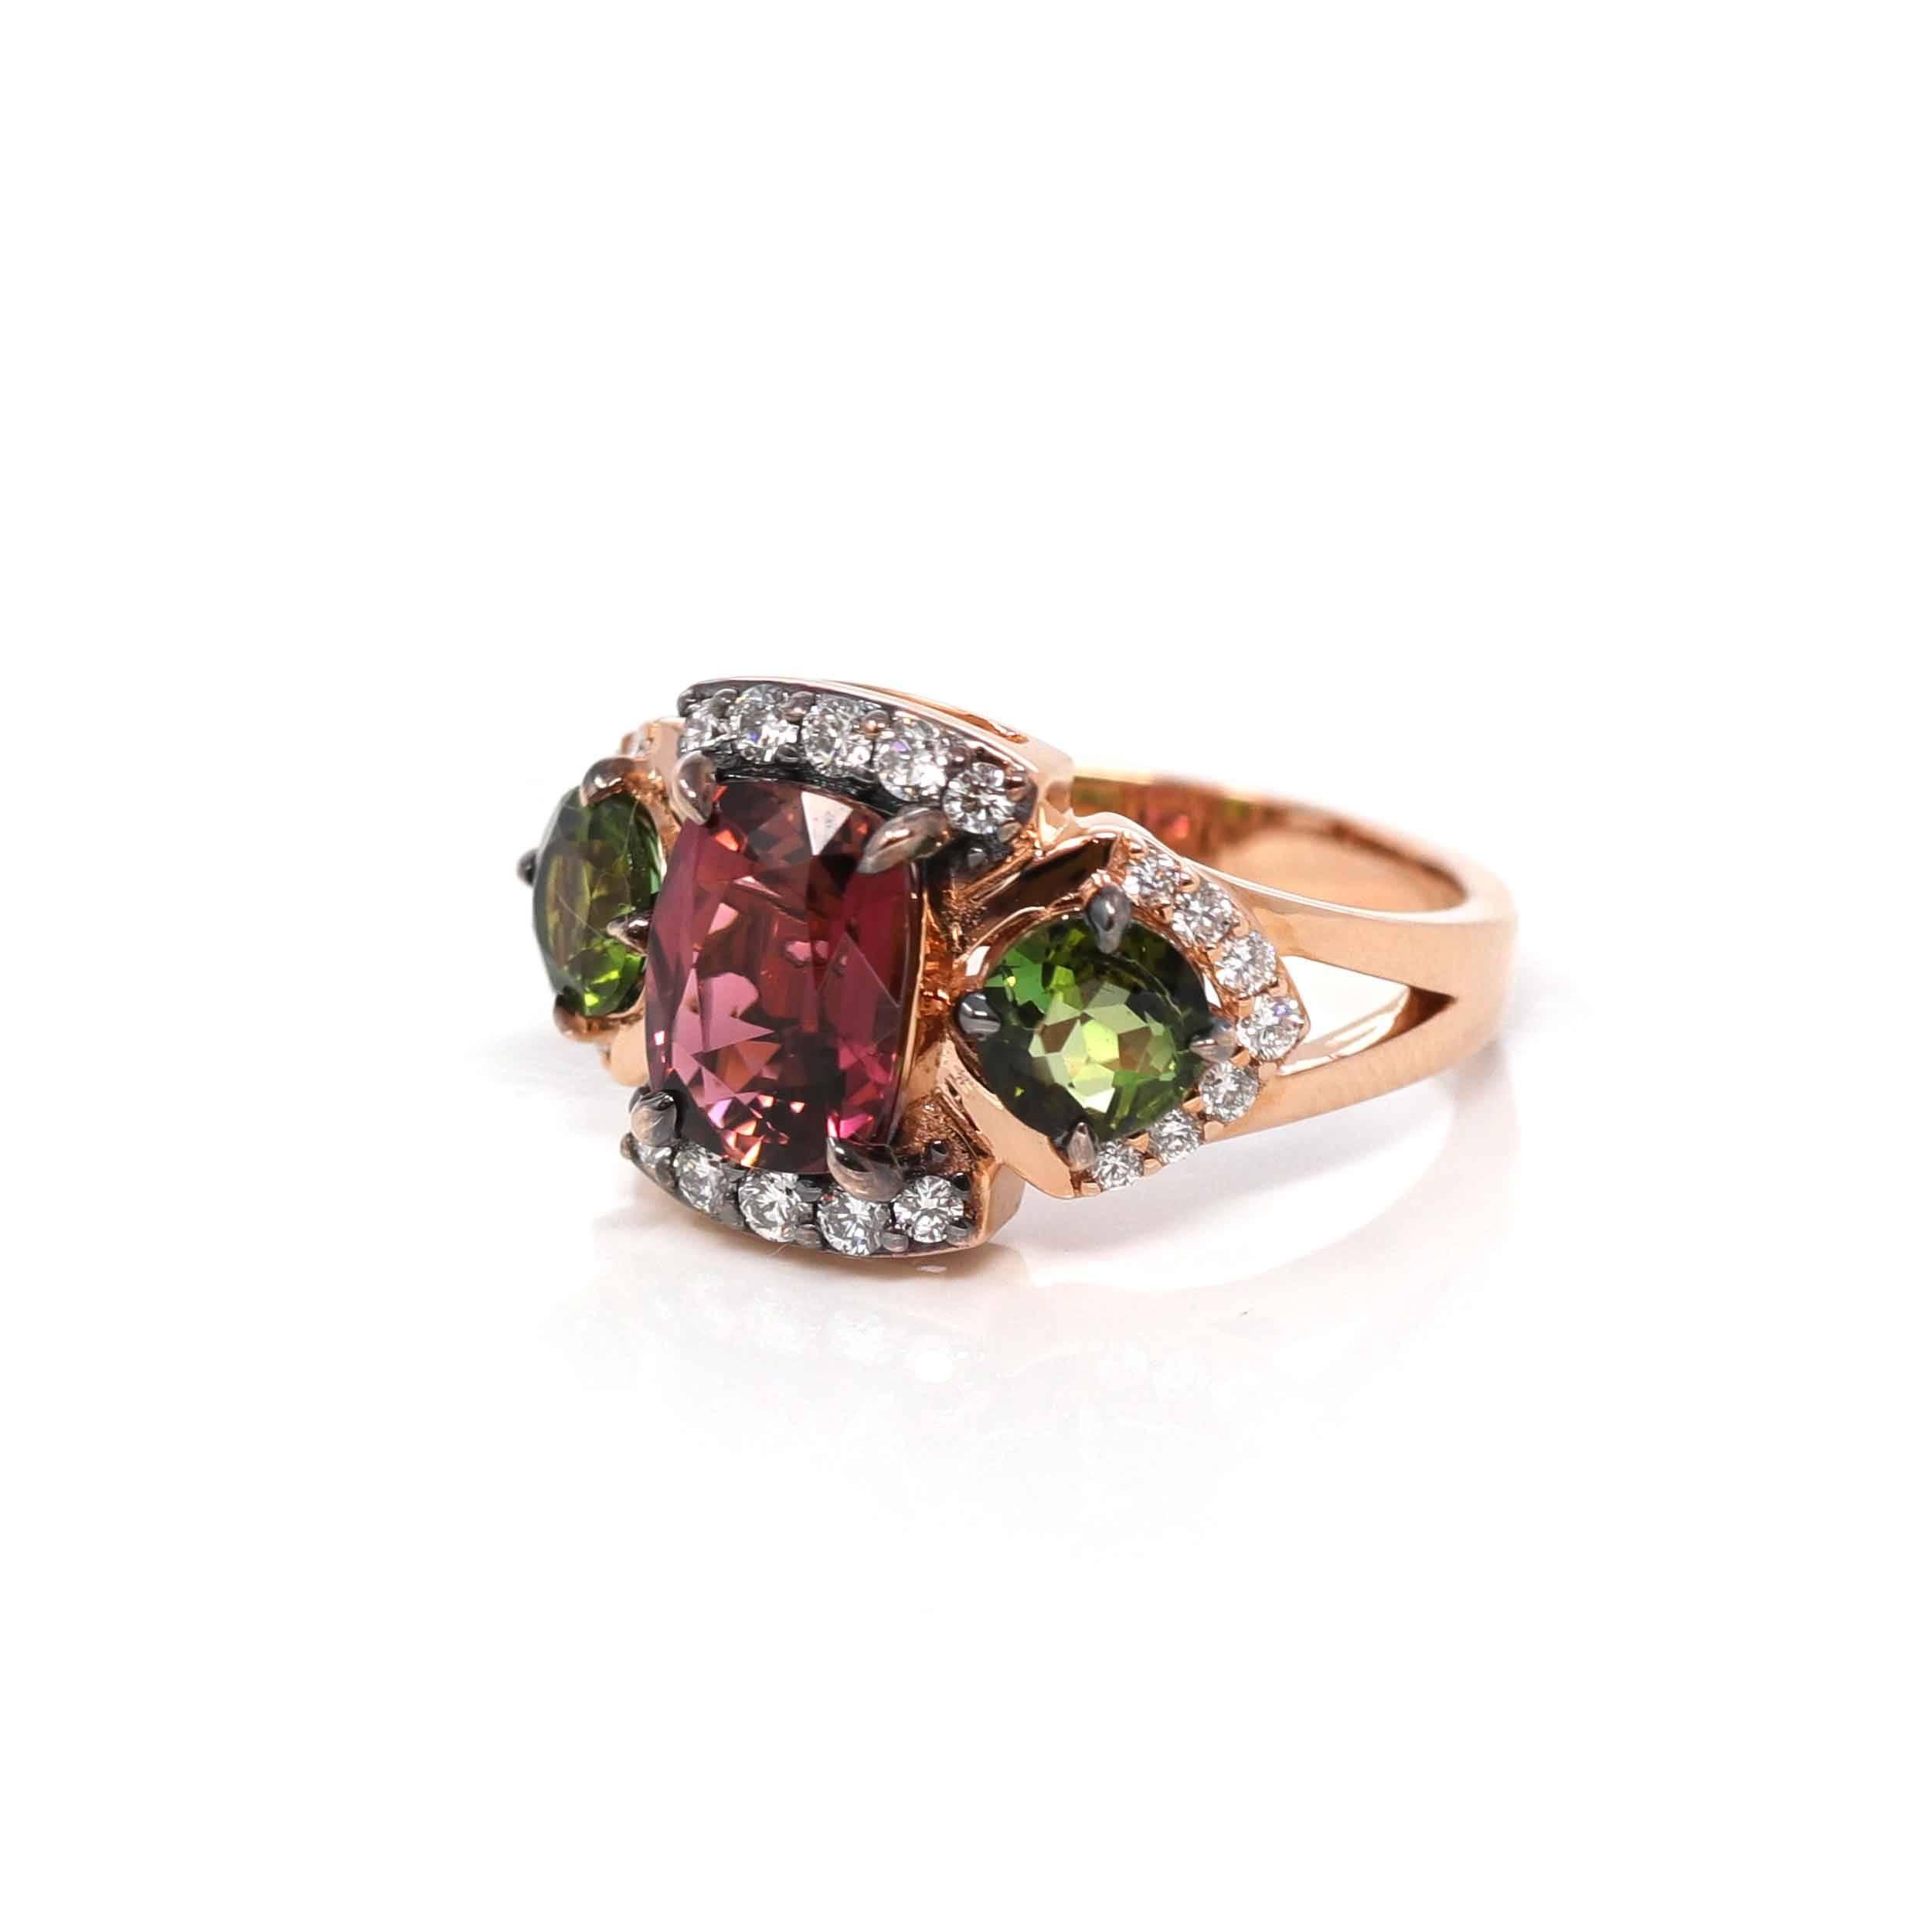 * Design Concept--- This ring features 3 Natural AAA tourmaline 2.365 ct. The design is simplistic yet elegant. The ring looks very exquisite with some diamonds tracing the accents. Baikalla artisans are dedicated to combining beautiful gemstones